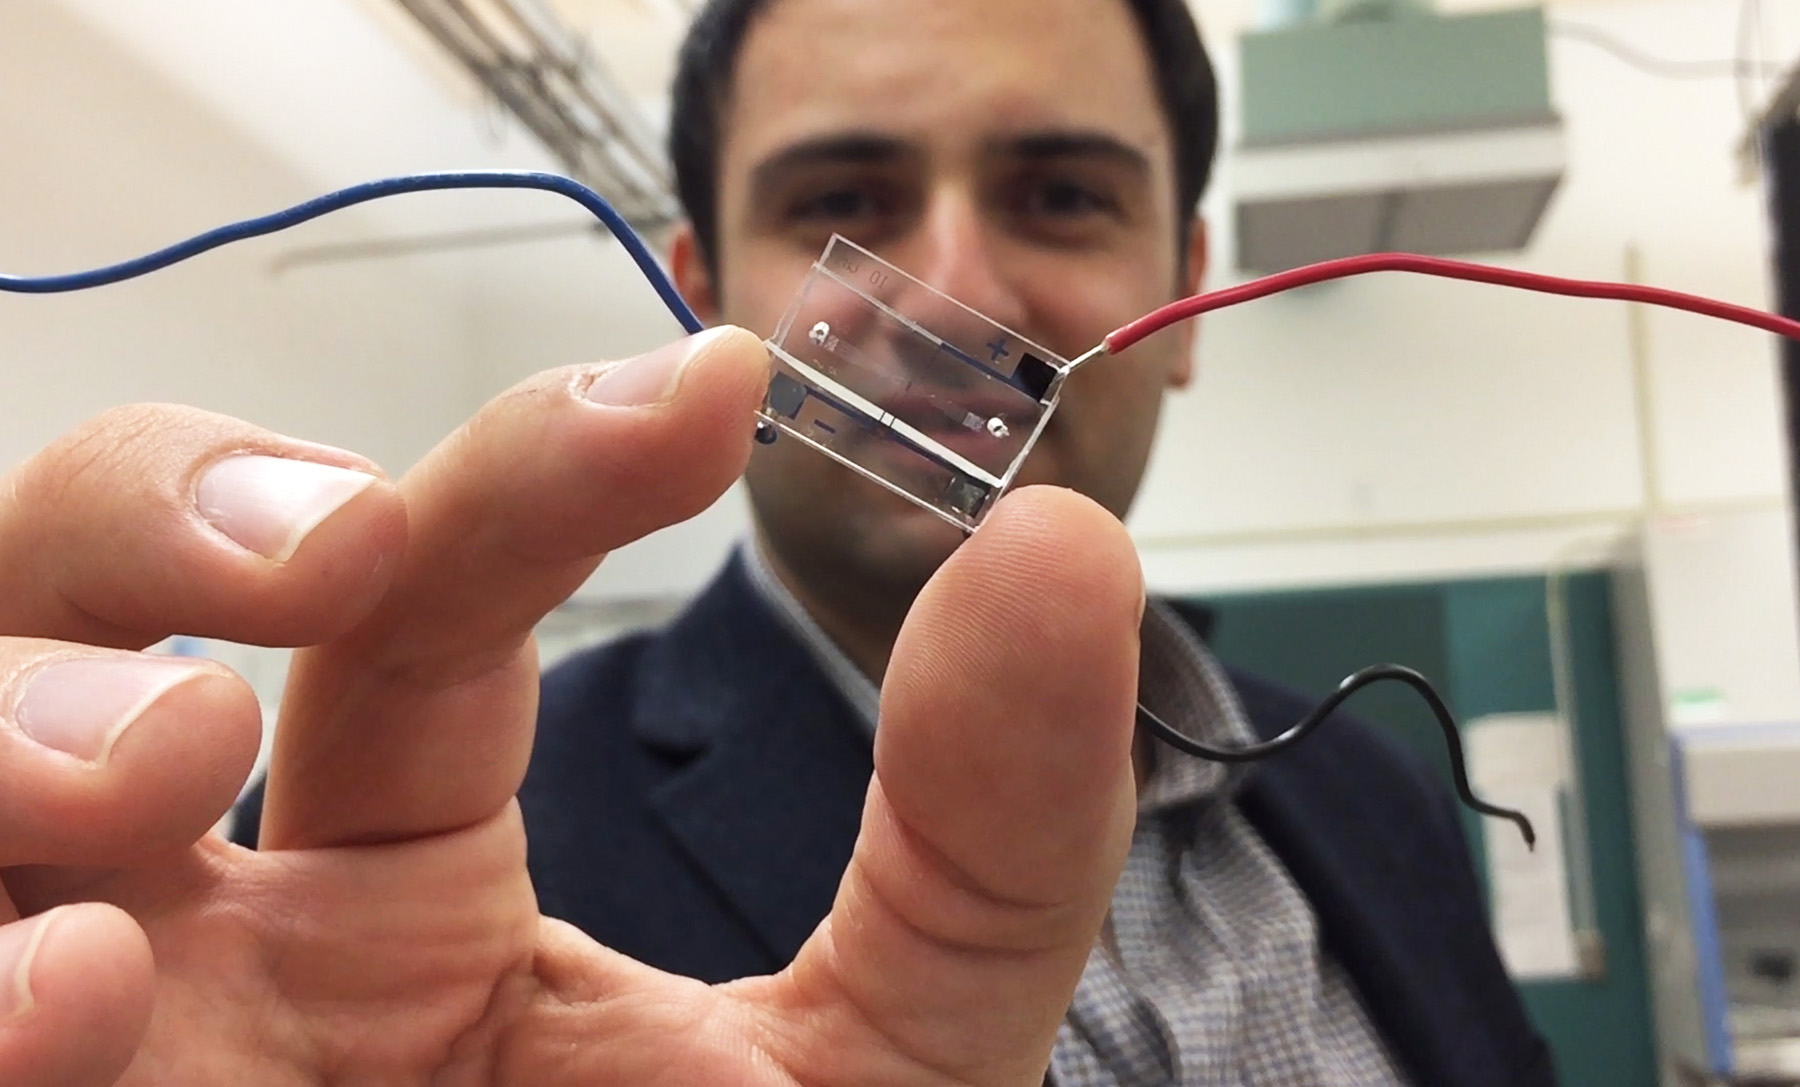 Fatih Sarioglu, an assistant professor in Georgia Tech’s School of Electrical and Computer Engineering, holds a hybrid microfluidic chip that uses a simple circuit pattern to assign a unique seven-bit digital identification number to each cell passing through the channels. (Credit: John Toon, Georgia Tech)